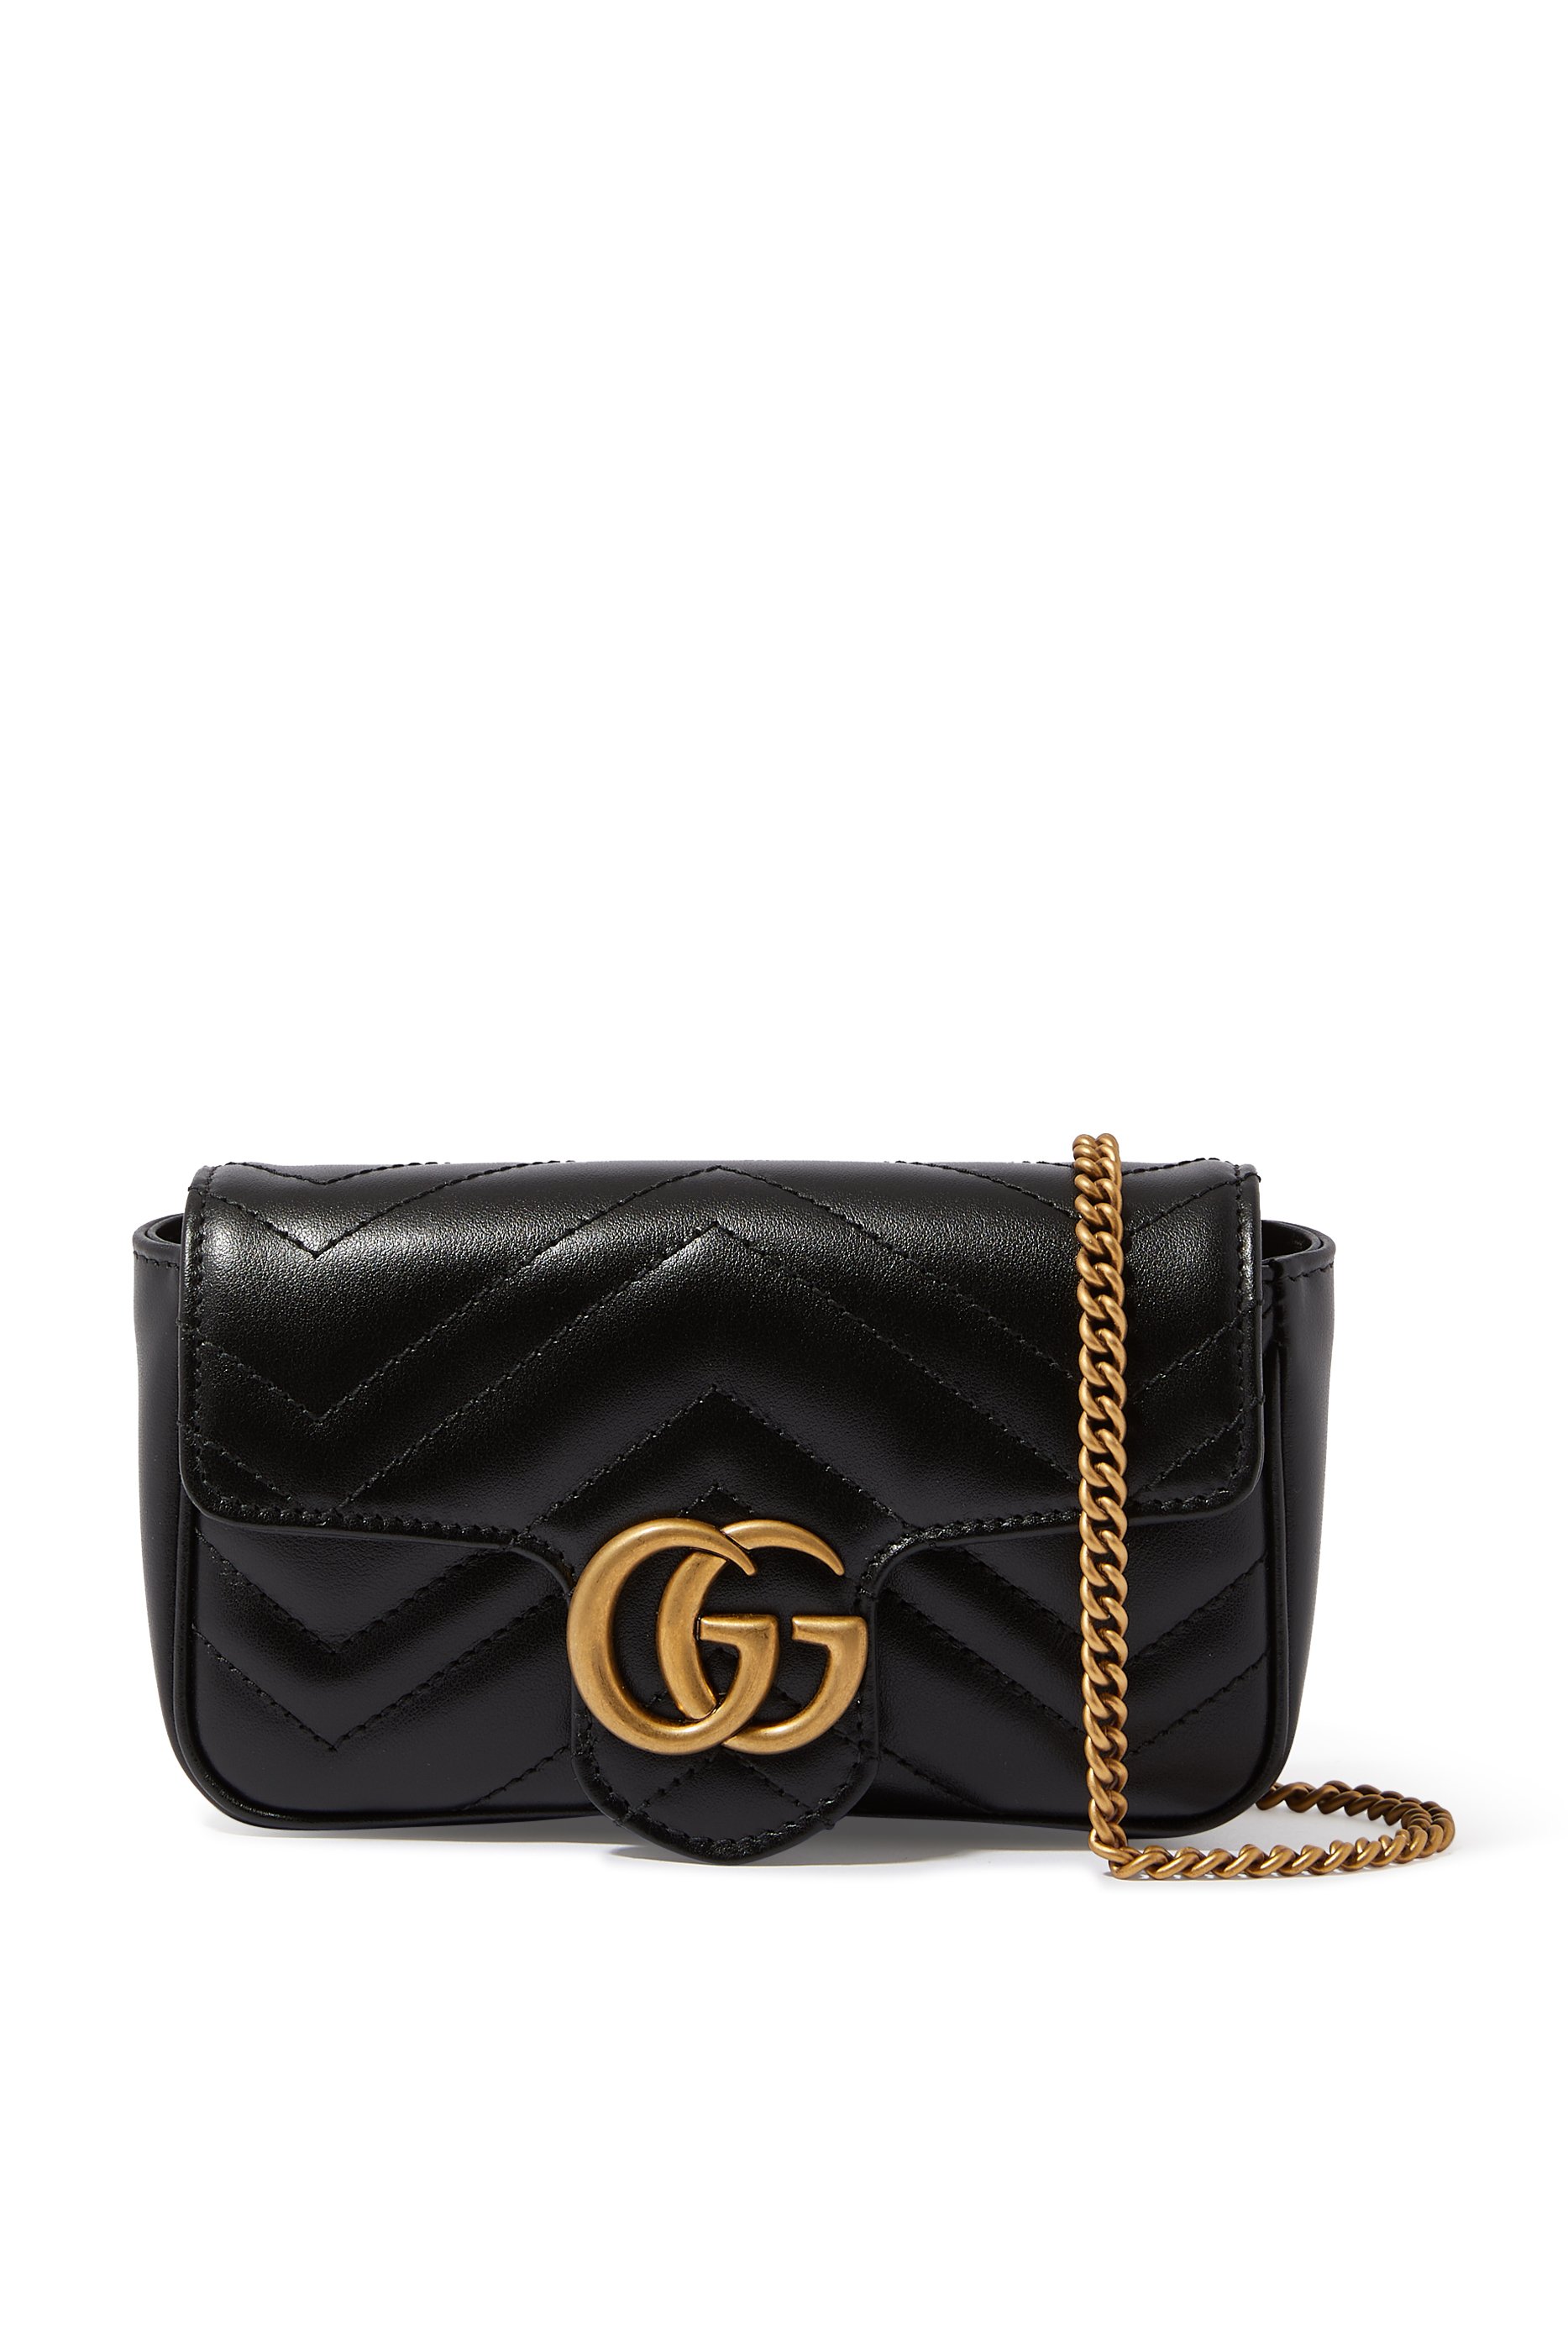 Buy Gucci GG Marmont Super Mini Bag for Womens | Bloomingdale's UAE